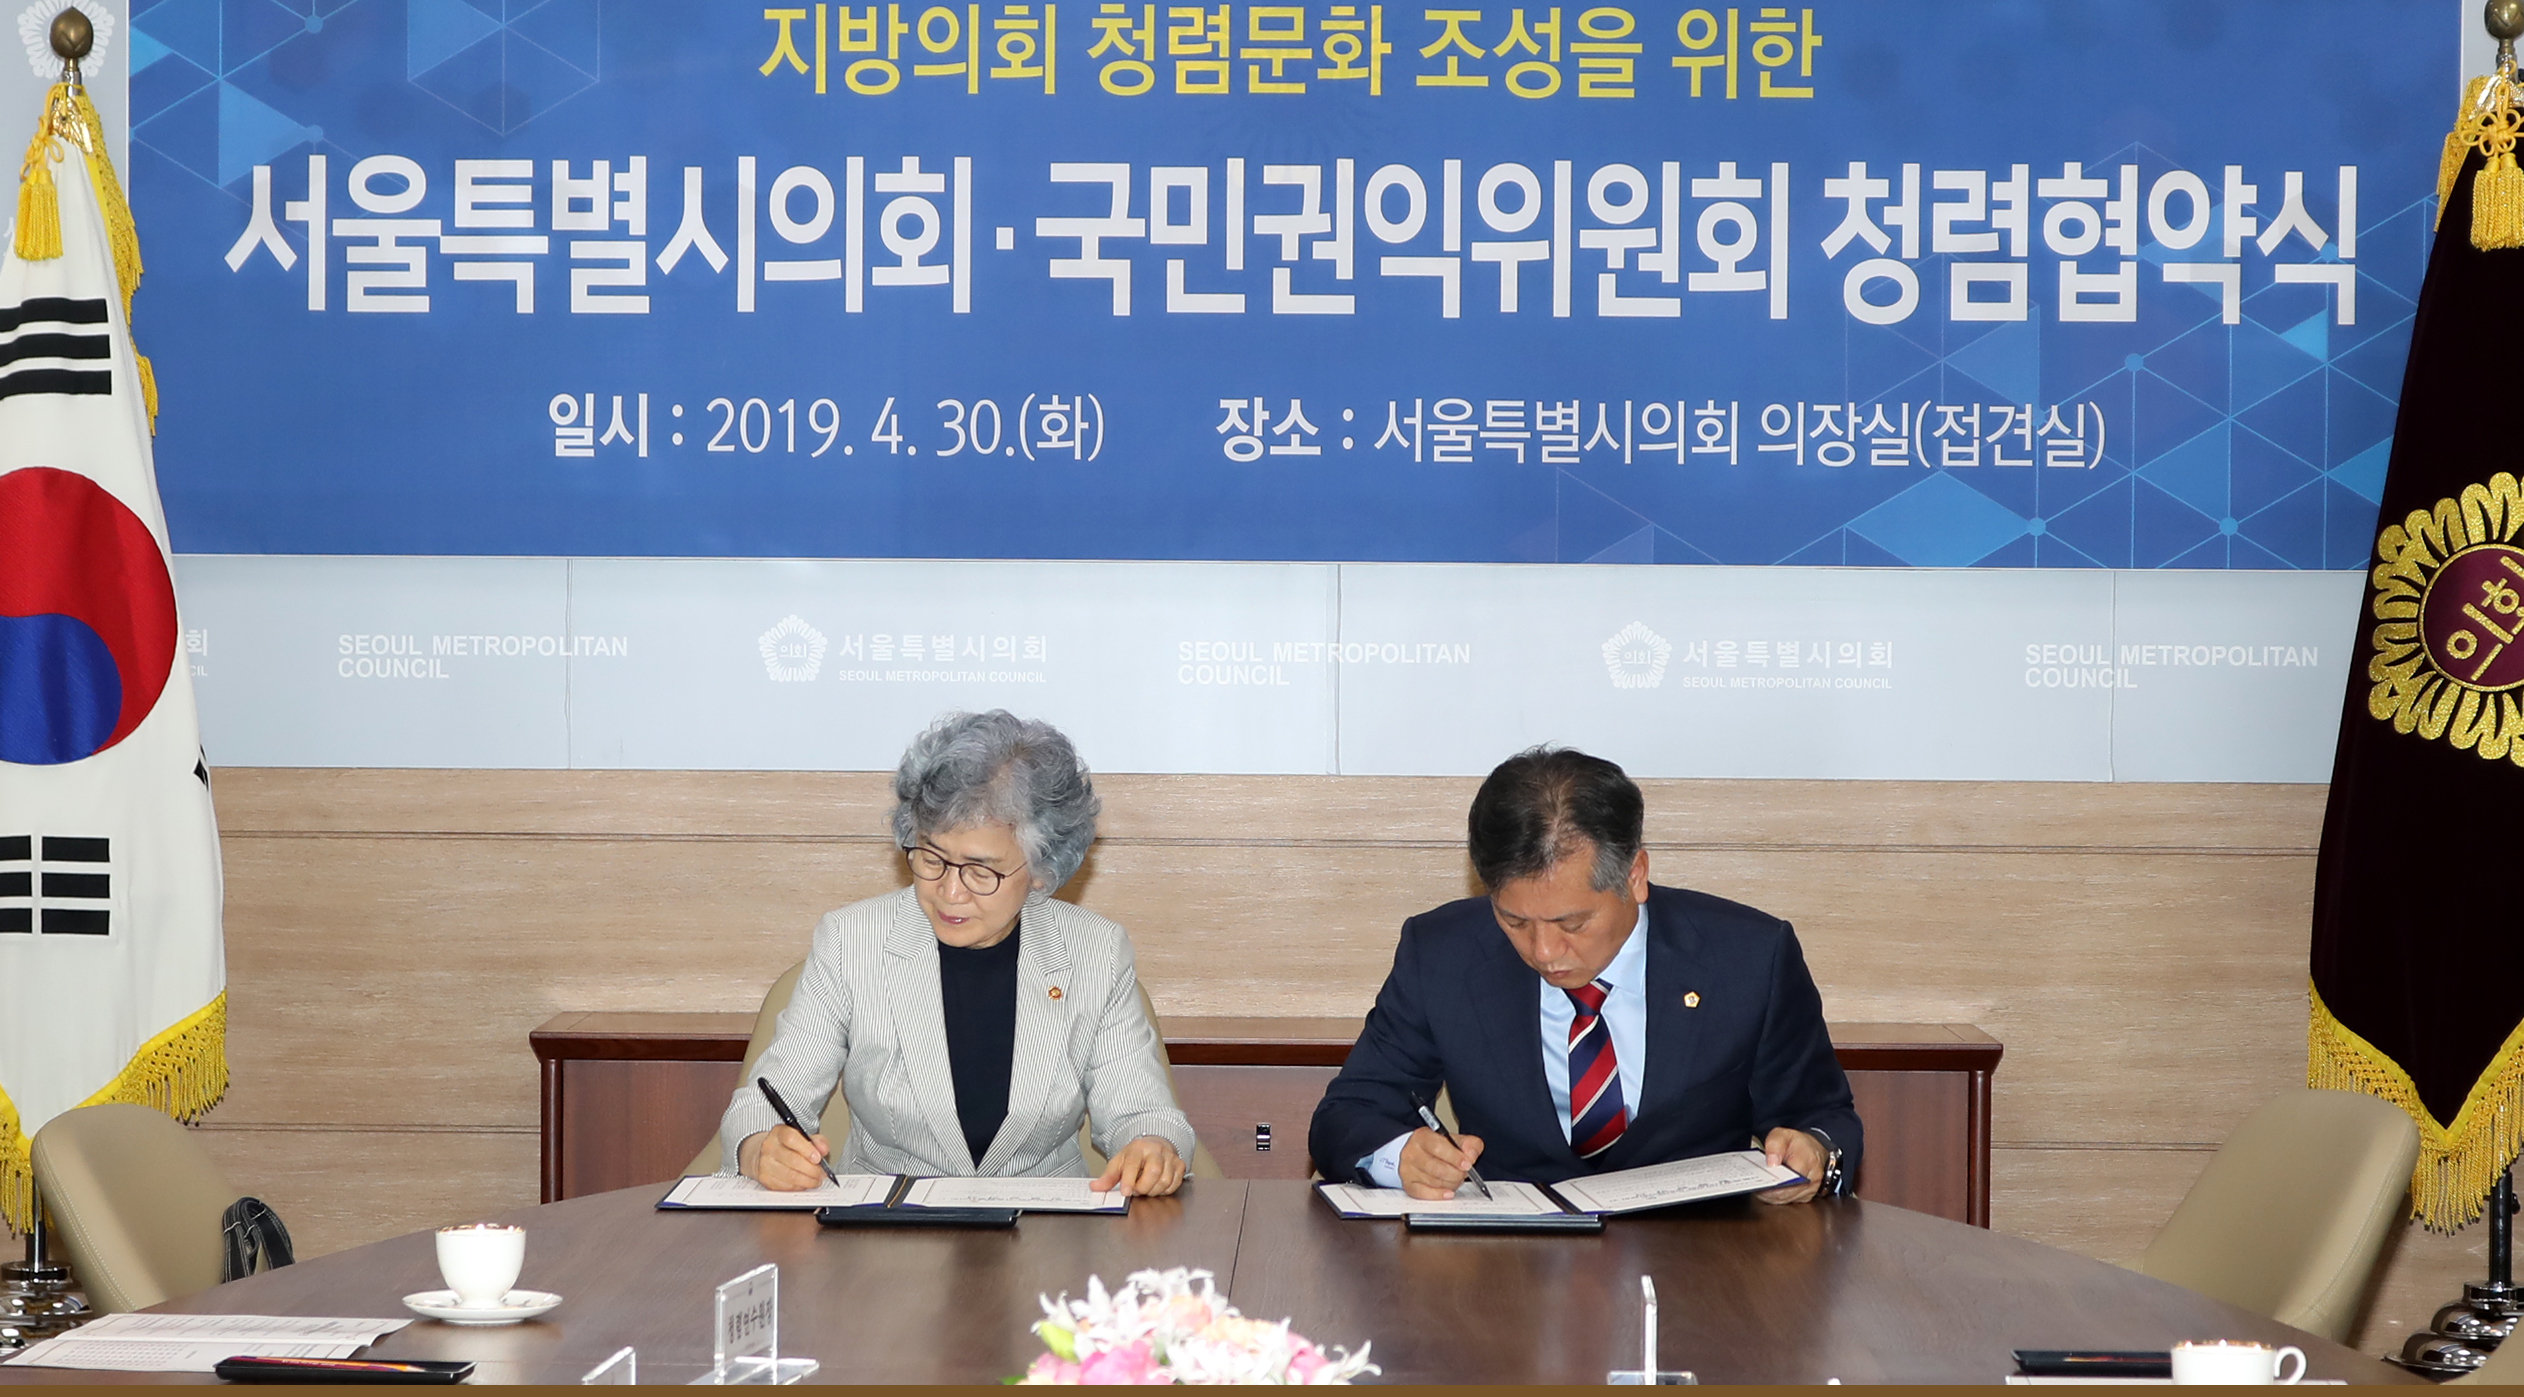 ACRC and the Seoul Metropolitan Council signed a Memorandum of Understanding to create integrity culture for local councils